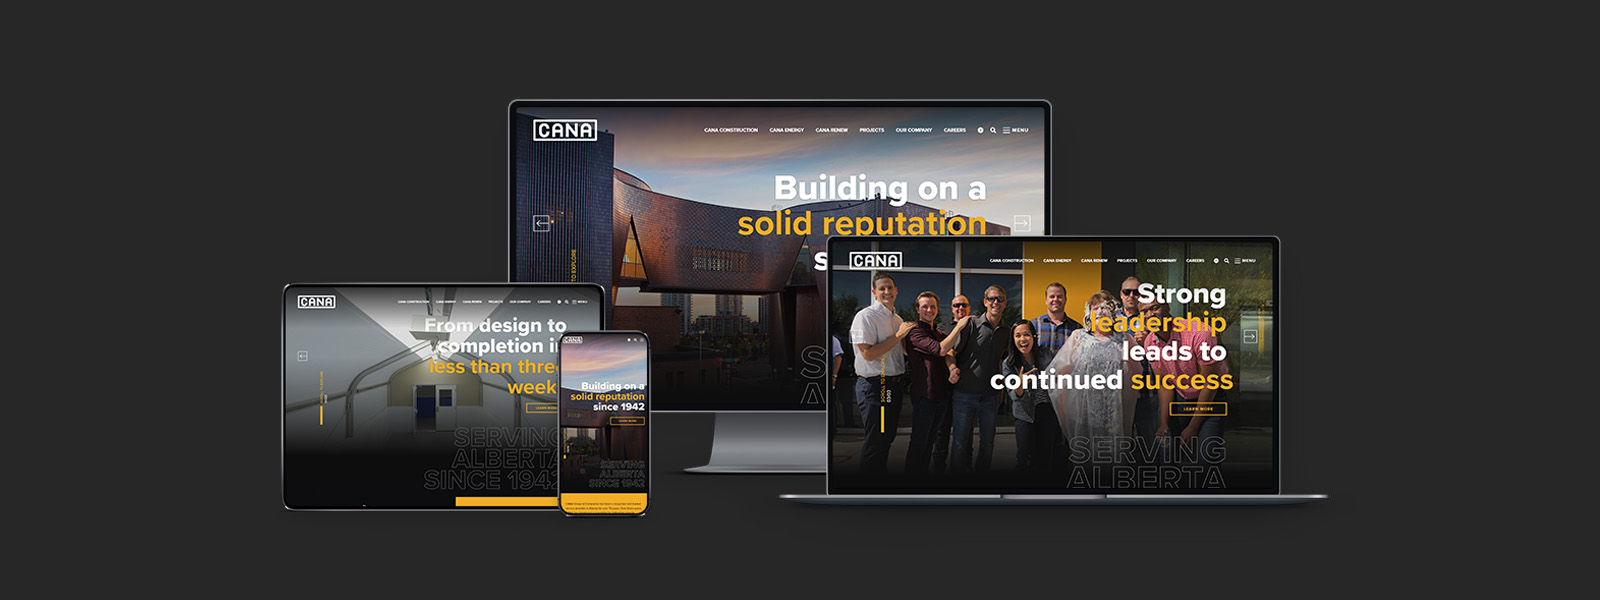 CANA Group of Companies new responsive website design by MORAD Creative Agency.